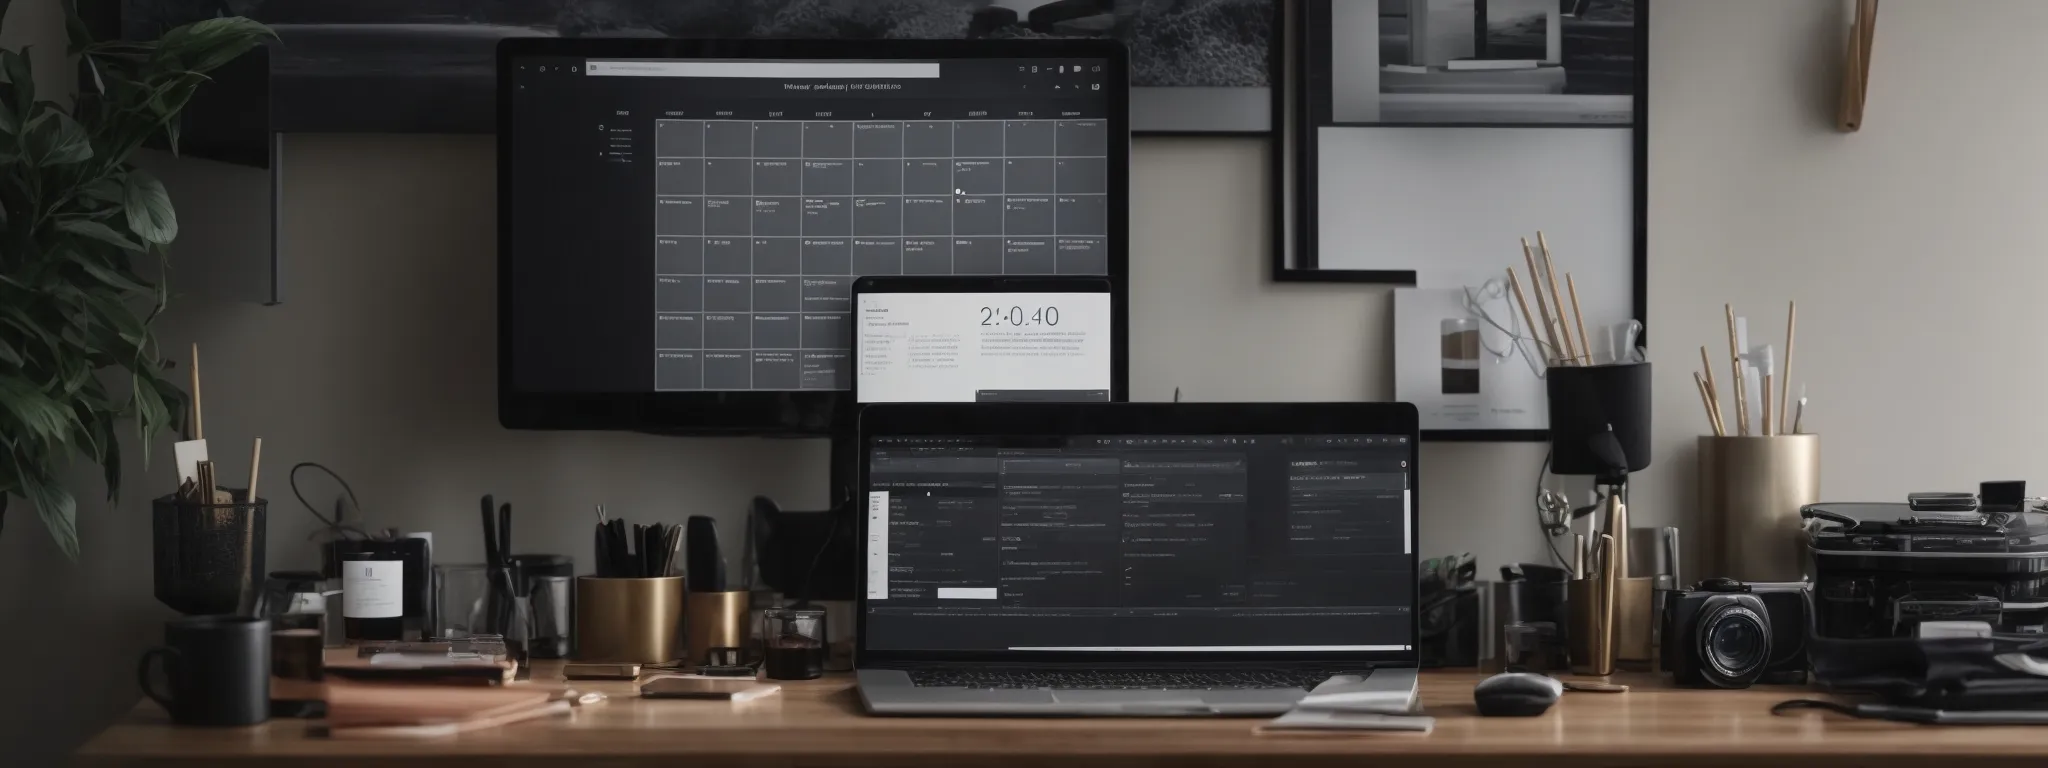 a sleek home office setup featuring a monitor displaying an organized calendar and email interface with a tagline hinting at artificial intelligence assistance.